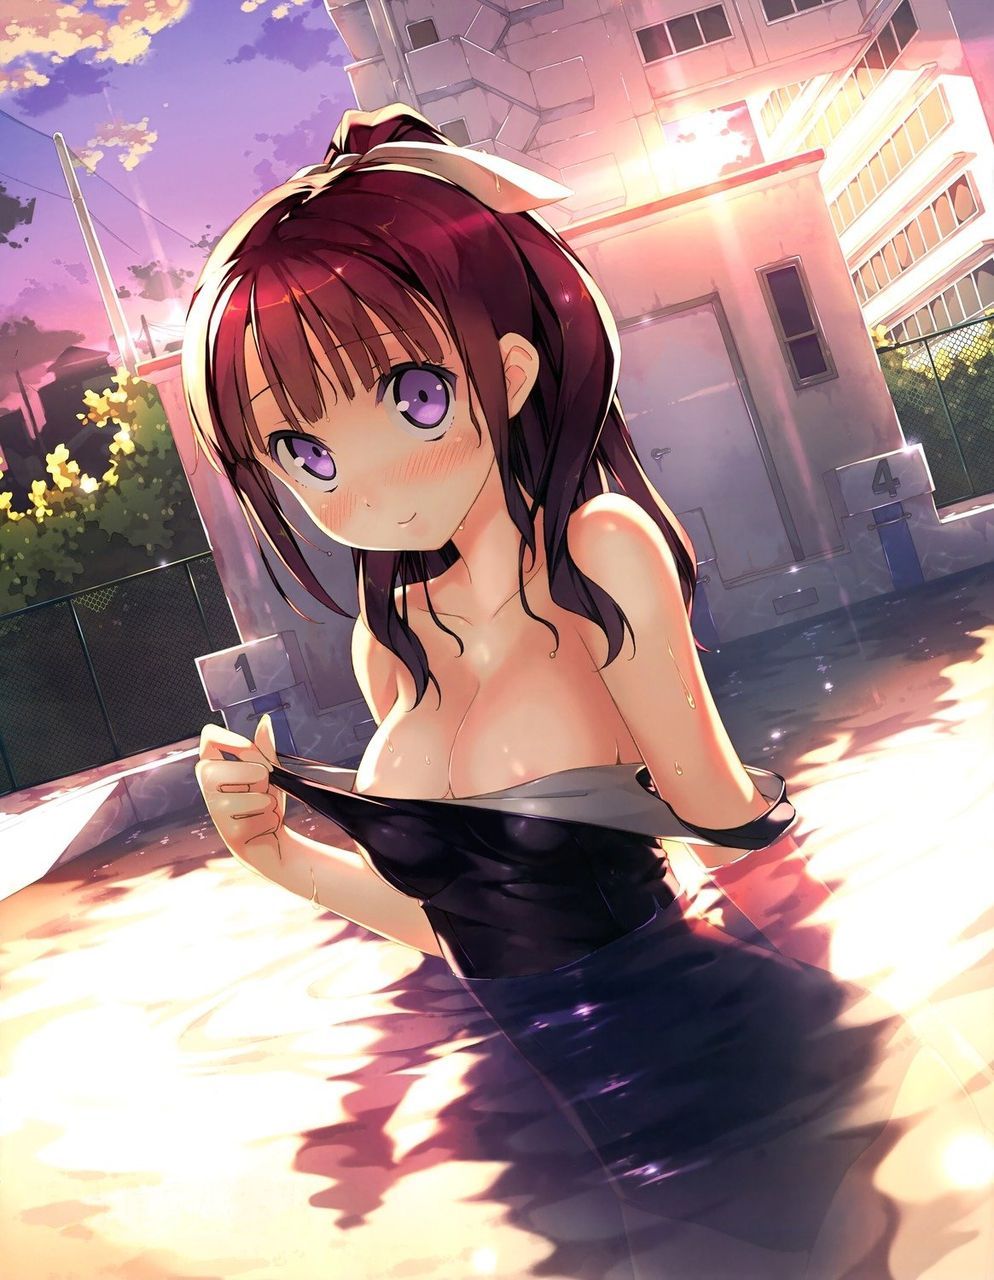 I want the image that is erotic thing in the swimsuit, please!!! 7